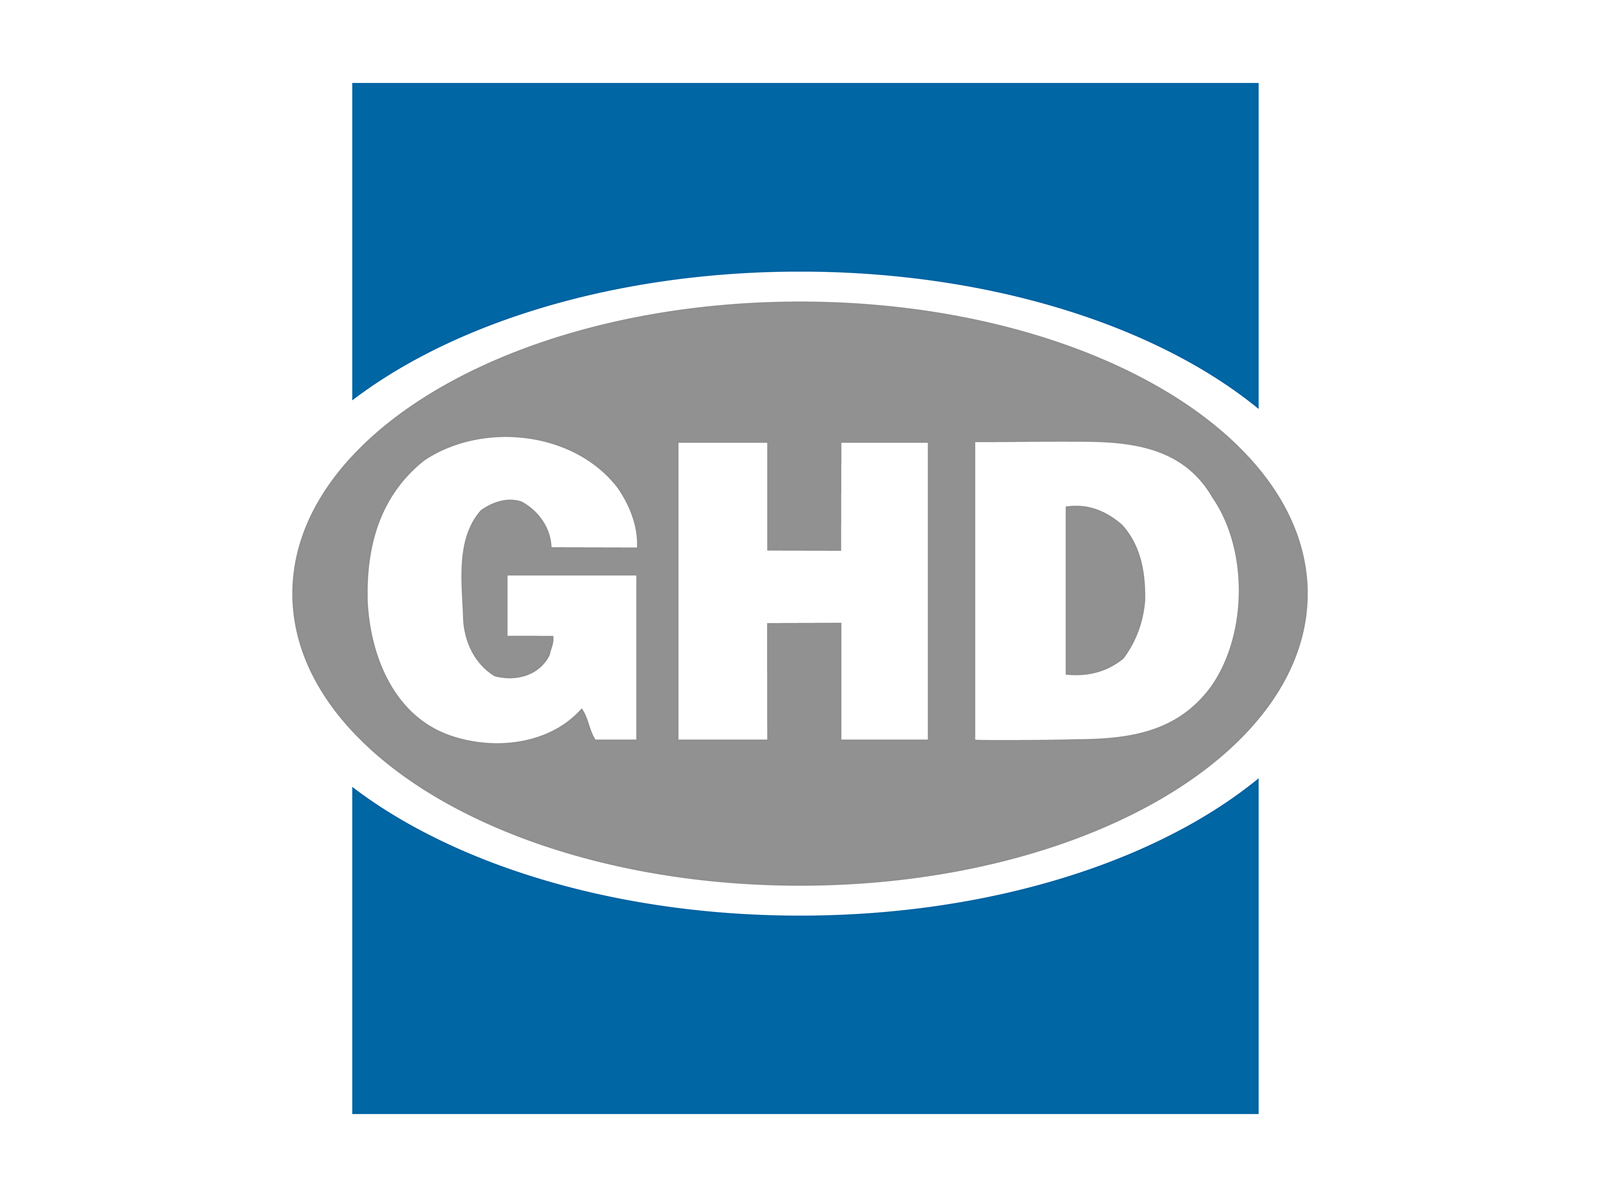 GHD is an international network of engineers, architects and environmental scientists serving clients in the global markets of water, energy and resources, environment, property and buildings, and transportation